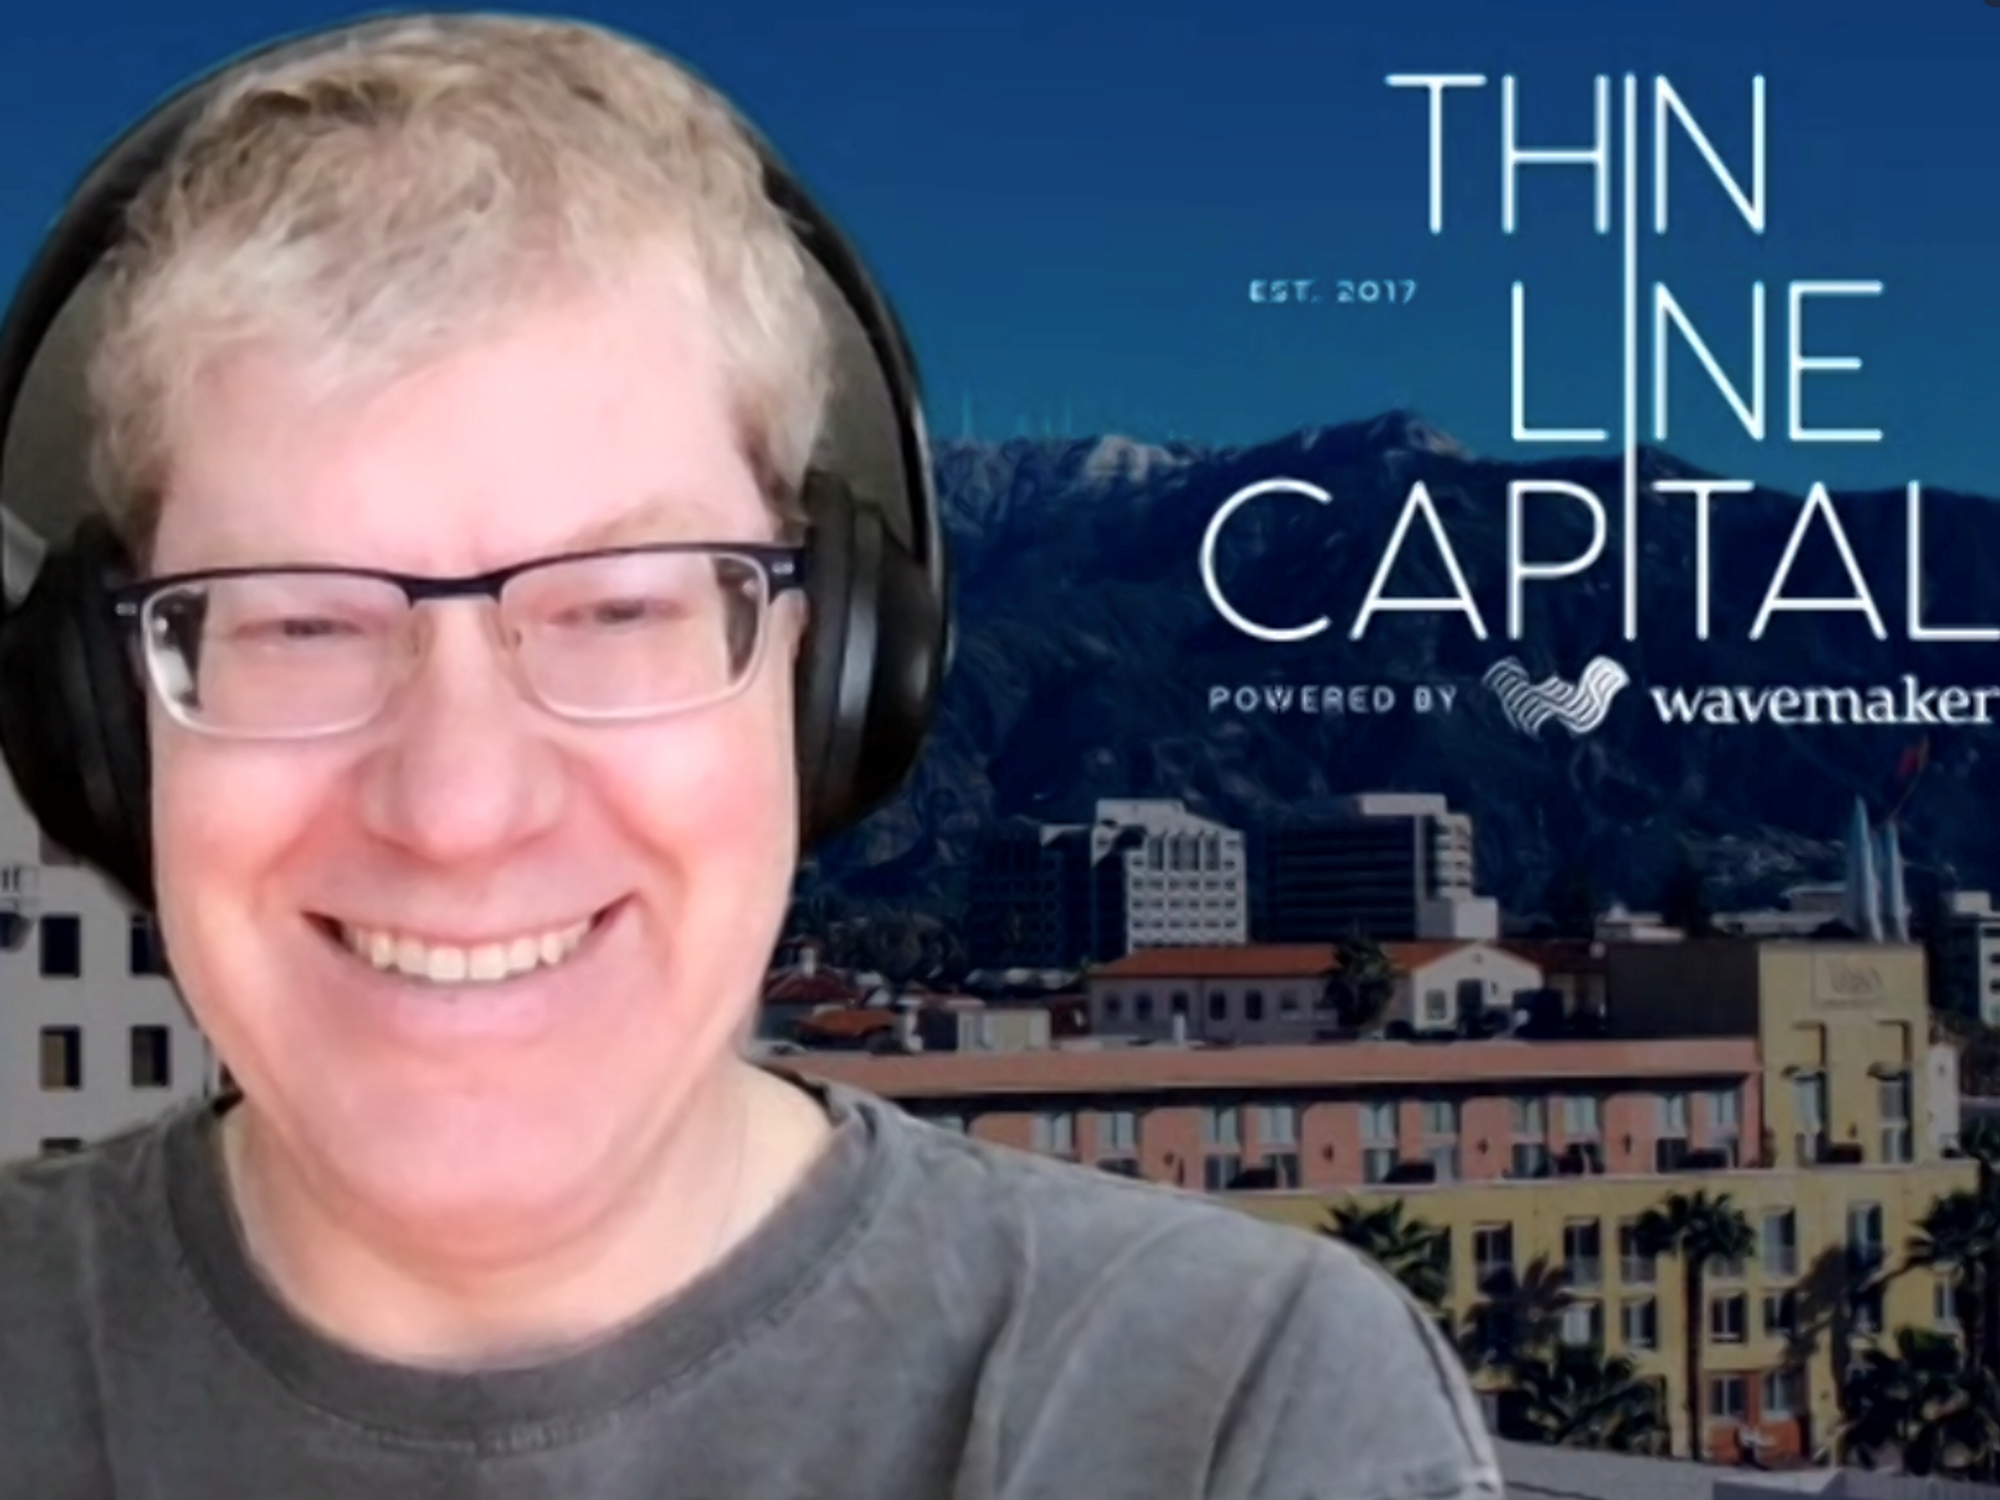 LA Venture Podcast: Thin Line Capital's Founder on the Opportunity in Clean Tech